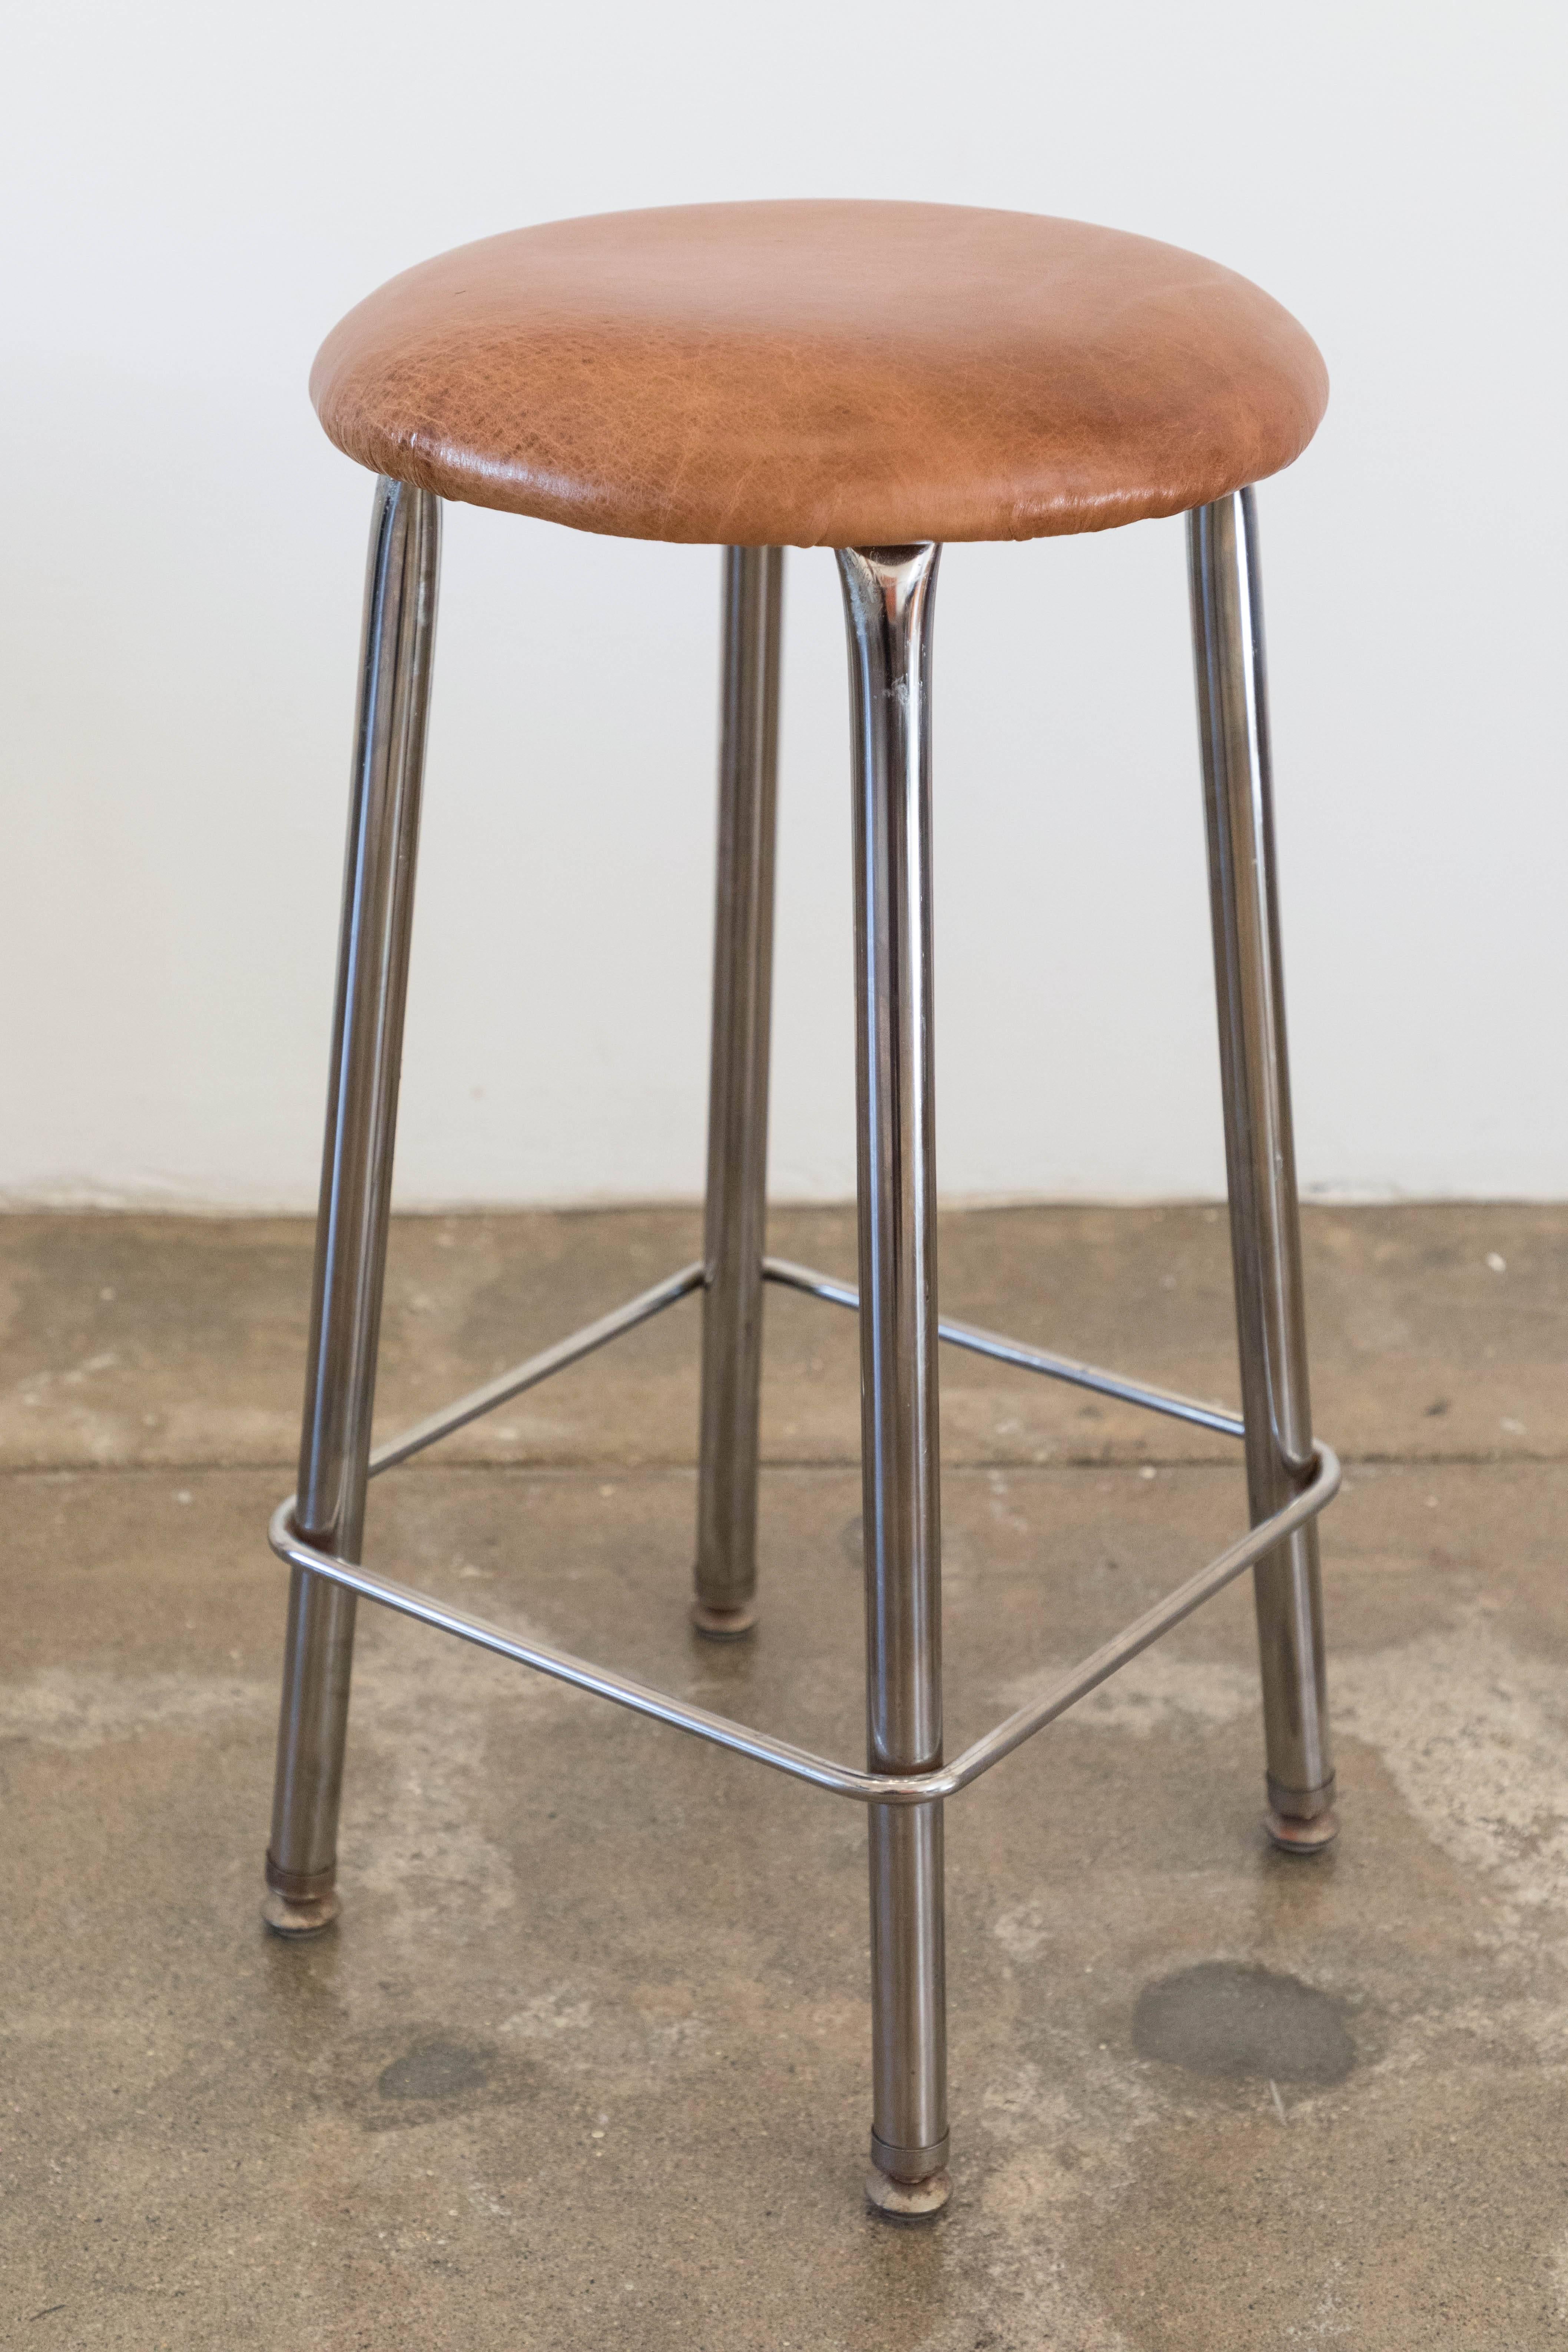 8 stools, 4 in hot pink leather and 4 in light brown leather, with chrome legs. Counter height. new foam and leather.